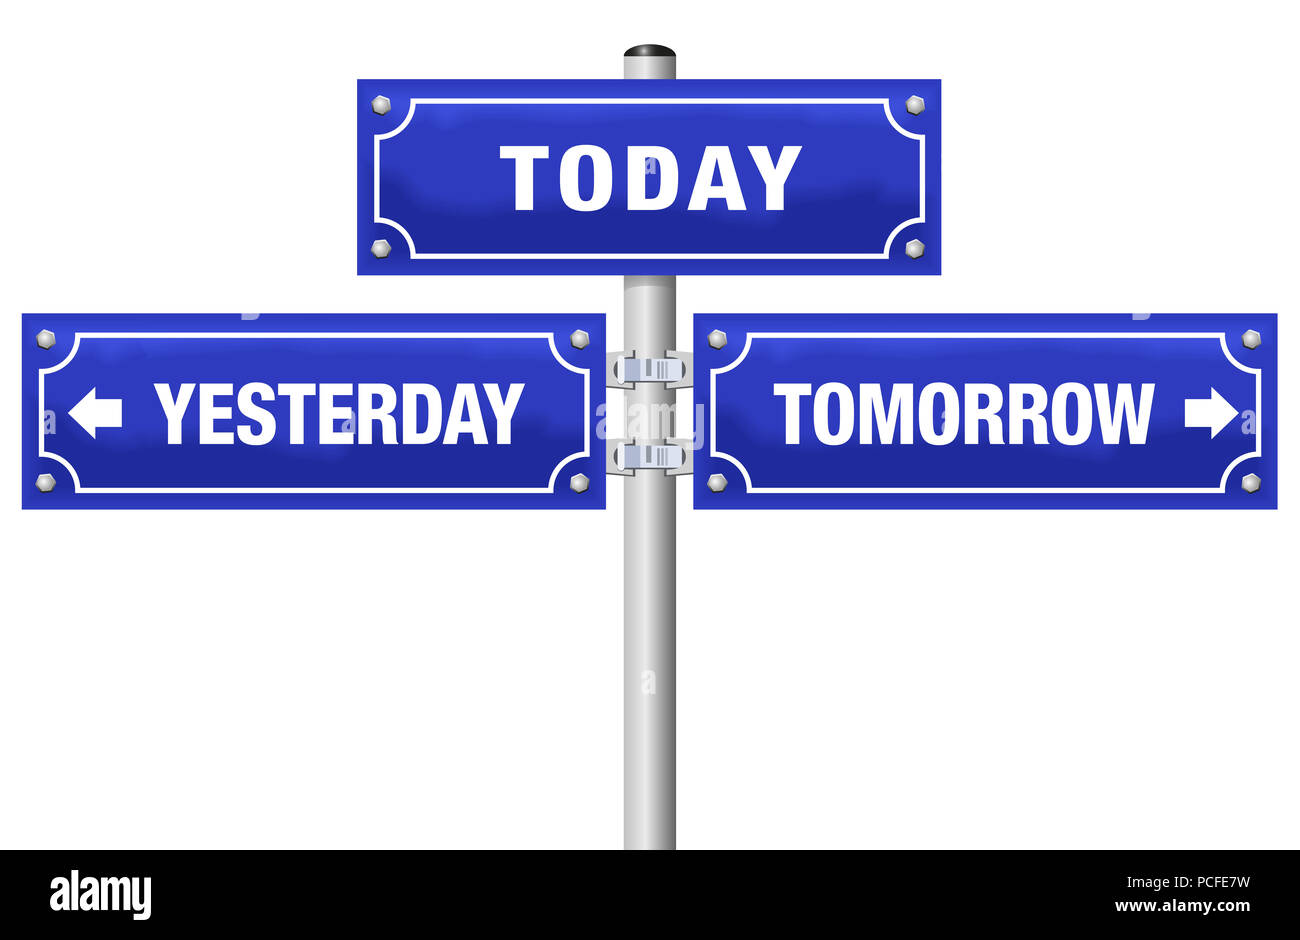 YESTERDAY, TODAY, TOMORROW, written on three blue signposts - symbolic for living in the here and now, not in the past or future. Stock Photo